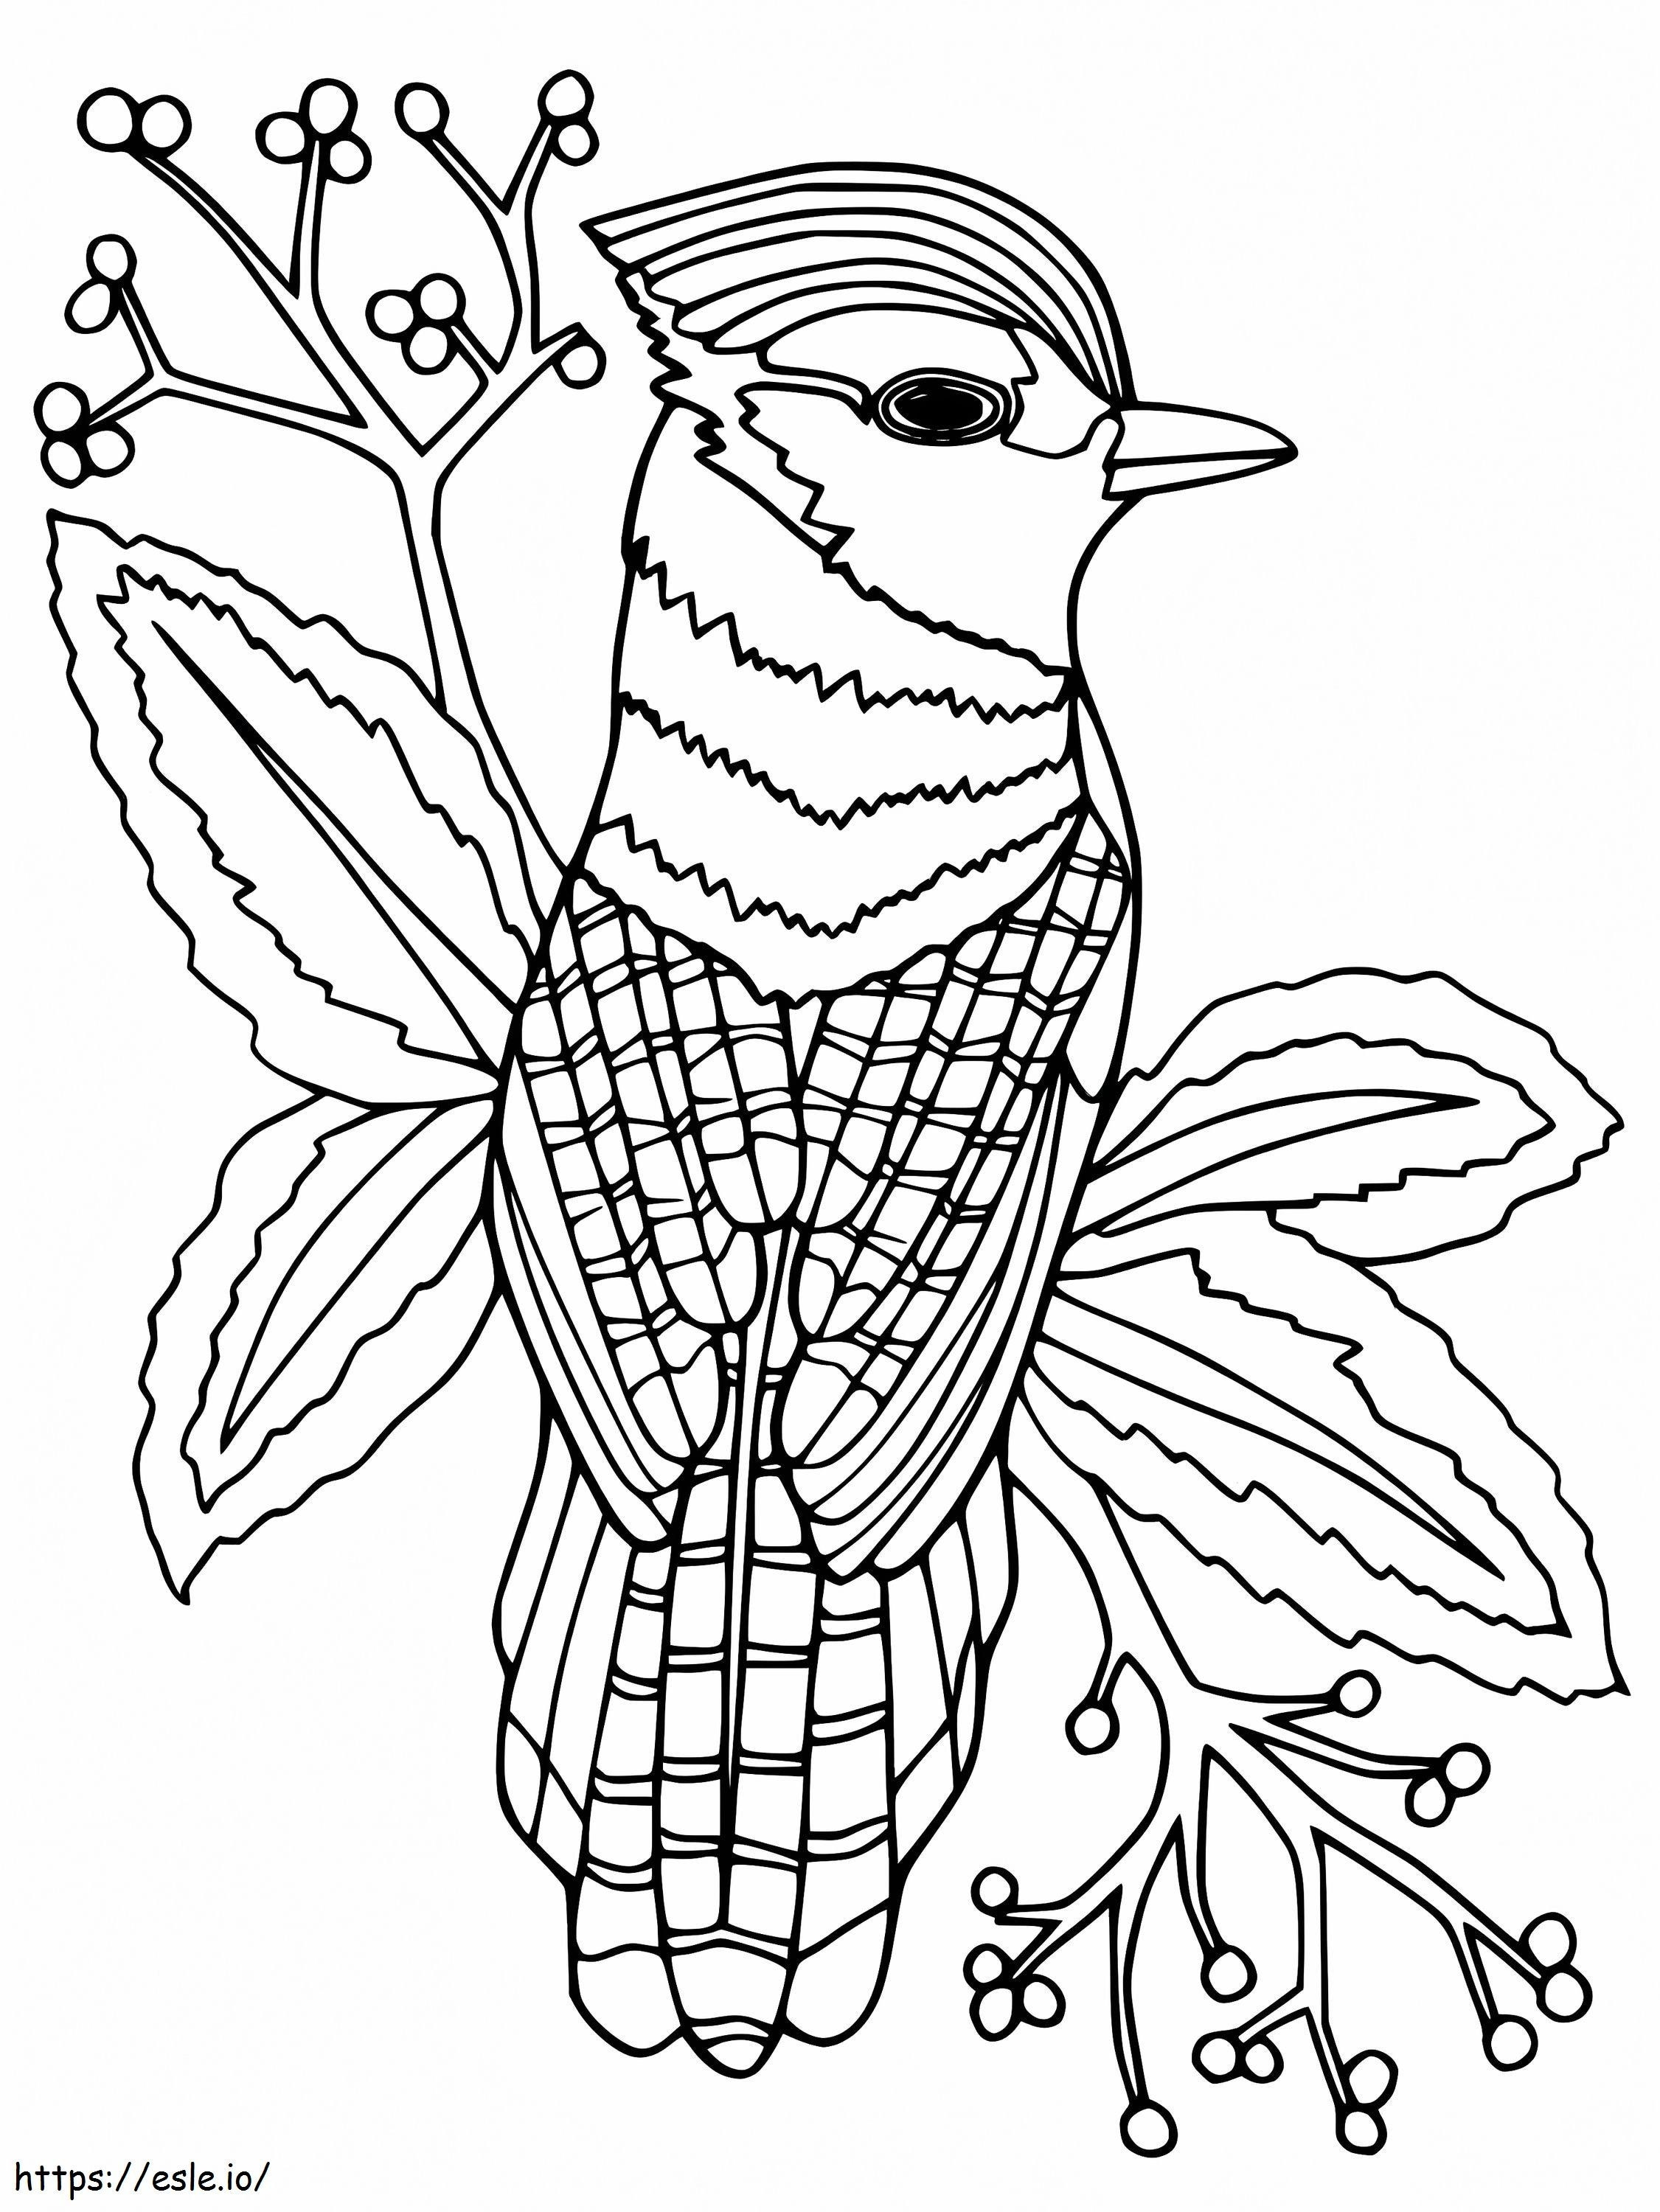 Blue Jay 8 coloring page